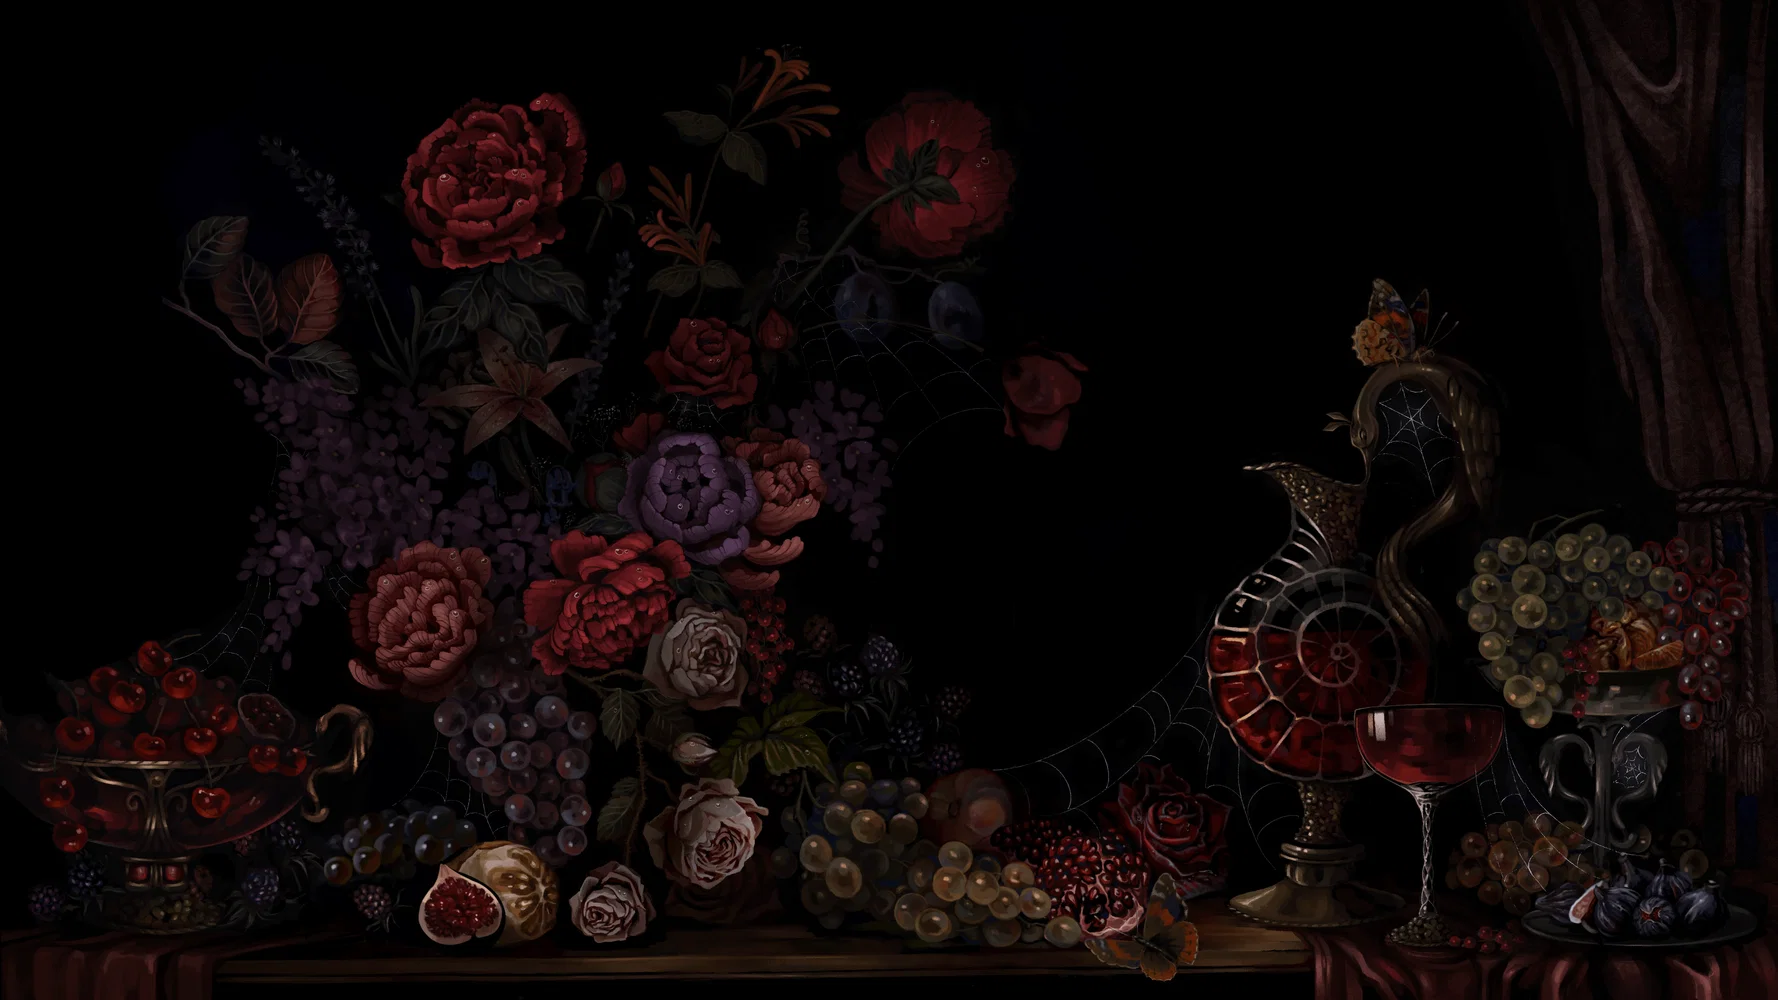 A lanscape drawing of a dark table covered in fruits and flowers. It is reminiscent of Dutch master still-lifes, with a dark fantasy ambiance.